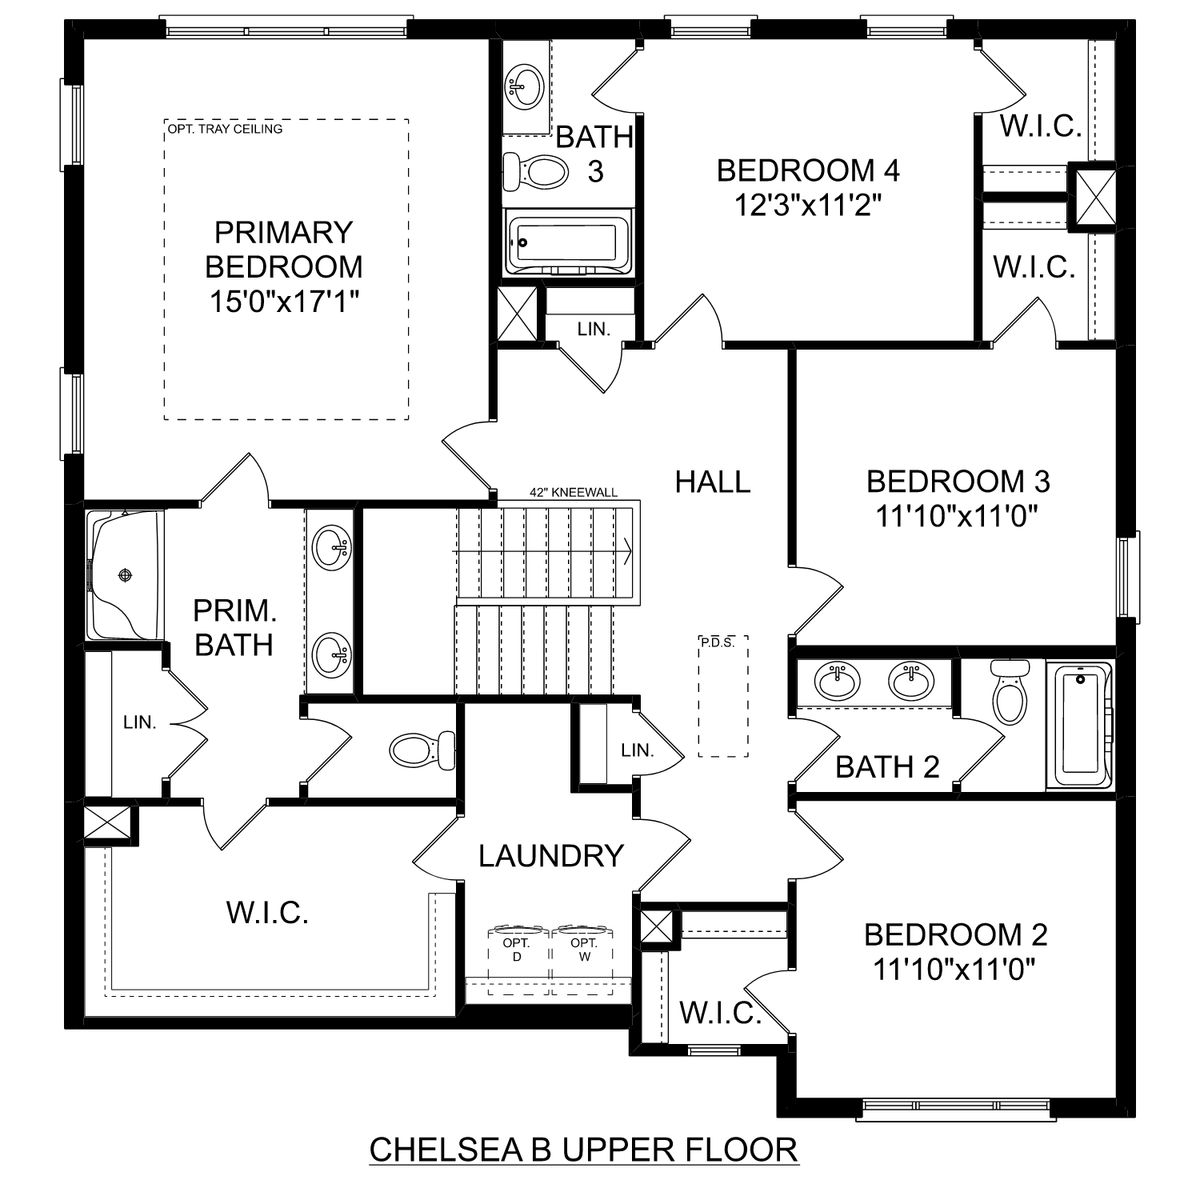 2 - The Chelsea B floor plan layout for 127 Rose Valley Drive in Davidson Homes' Creek Grove community.